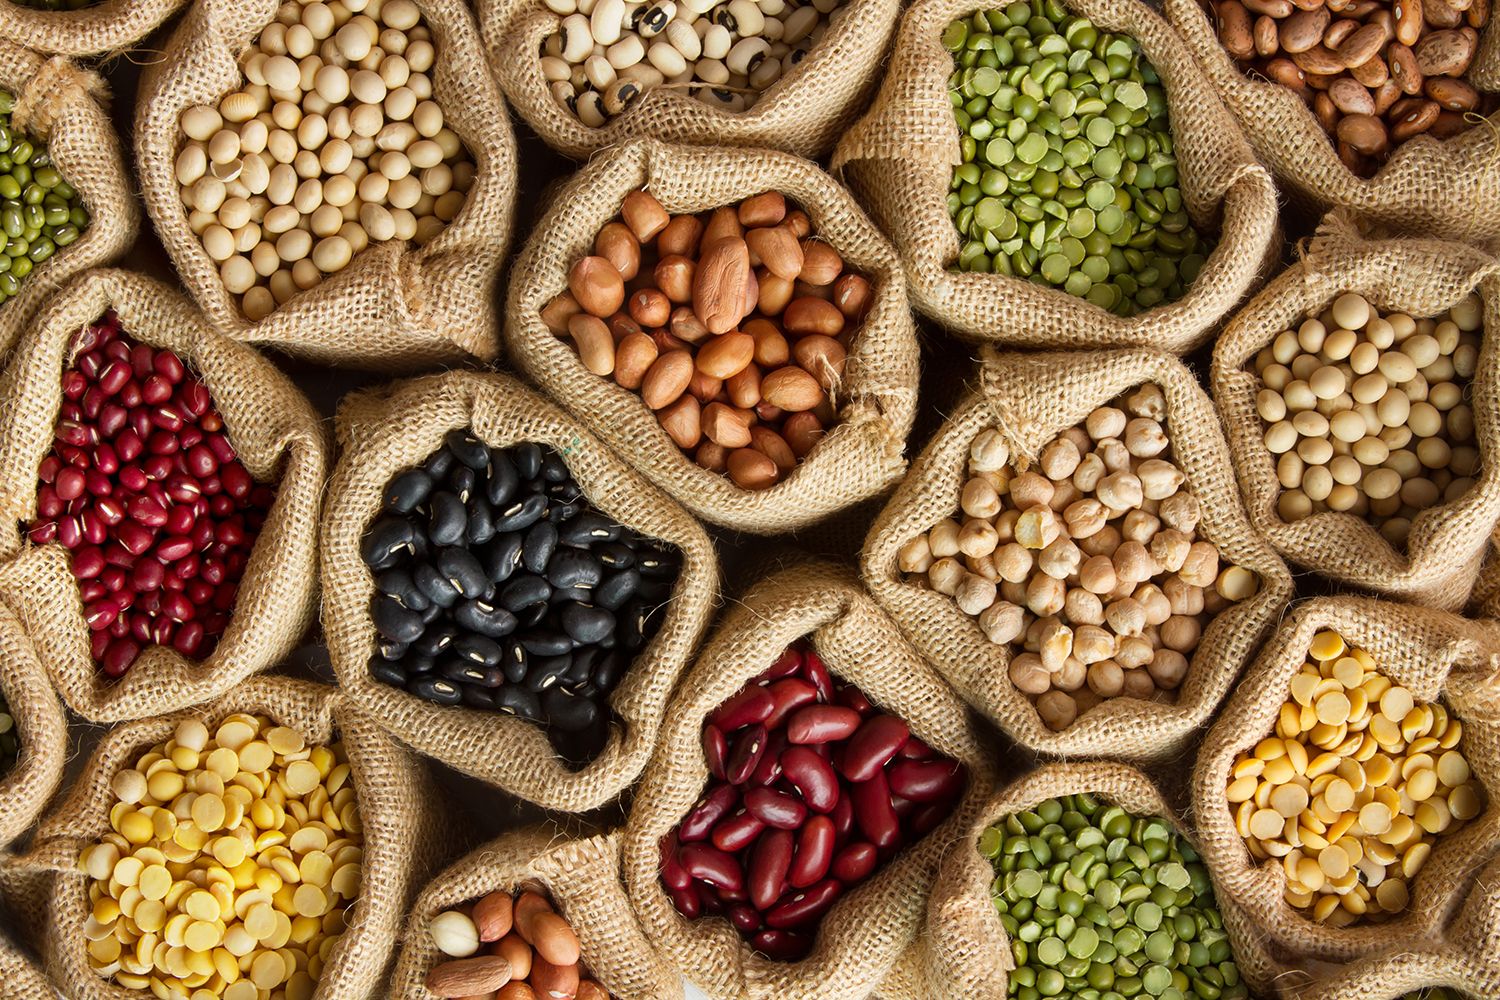 Sacks of different beans and pulses